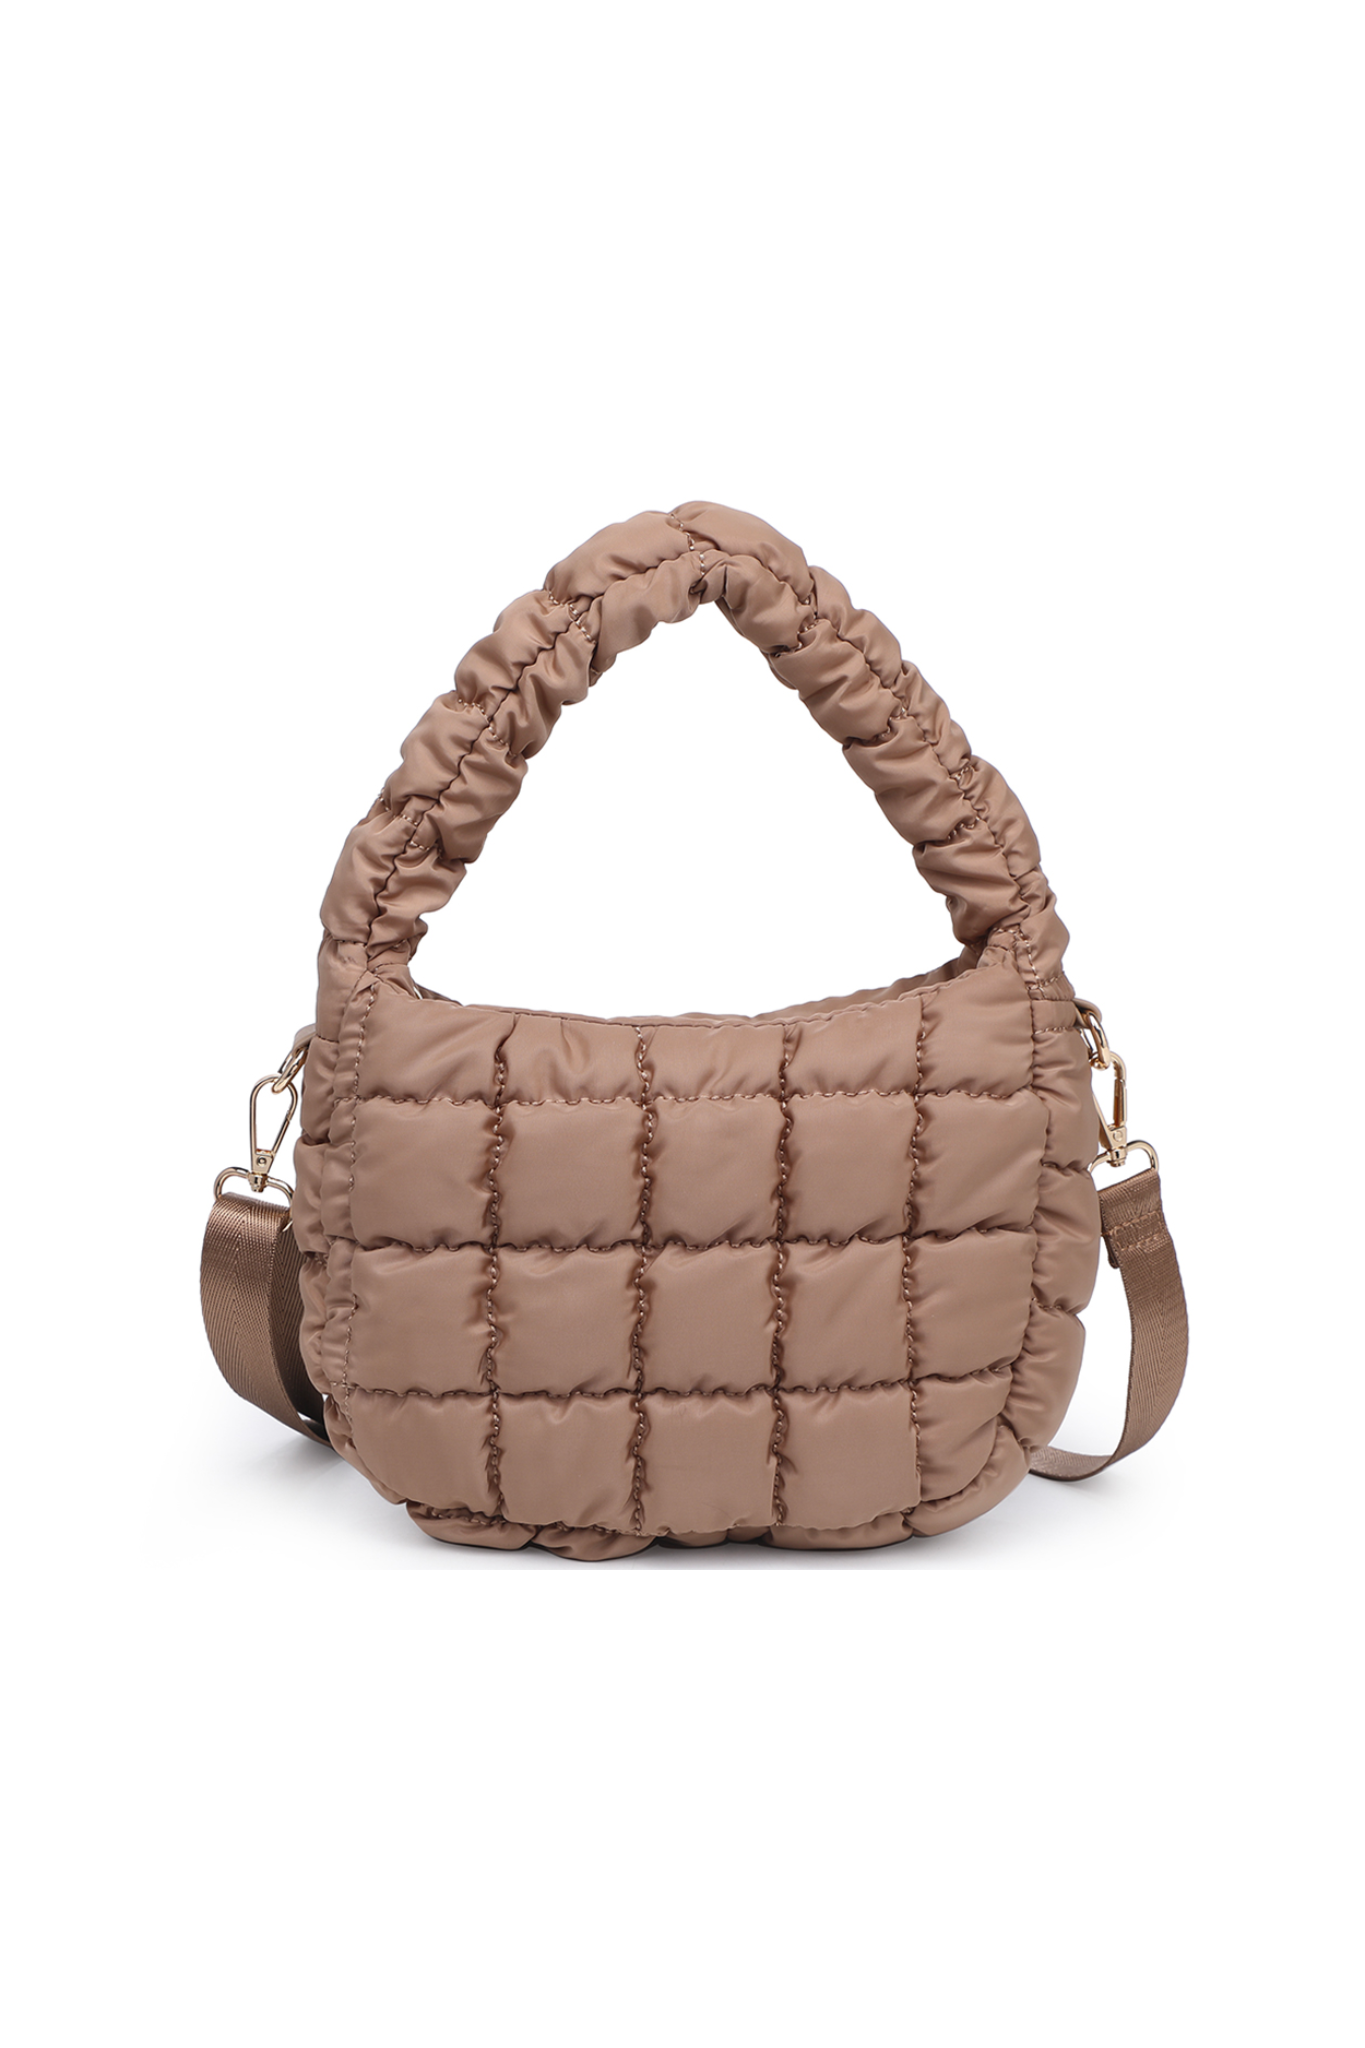 Moiu Mini Quilted Bag in Sand